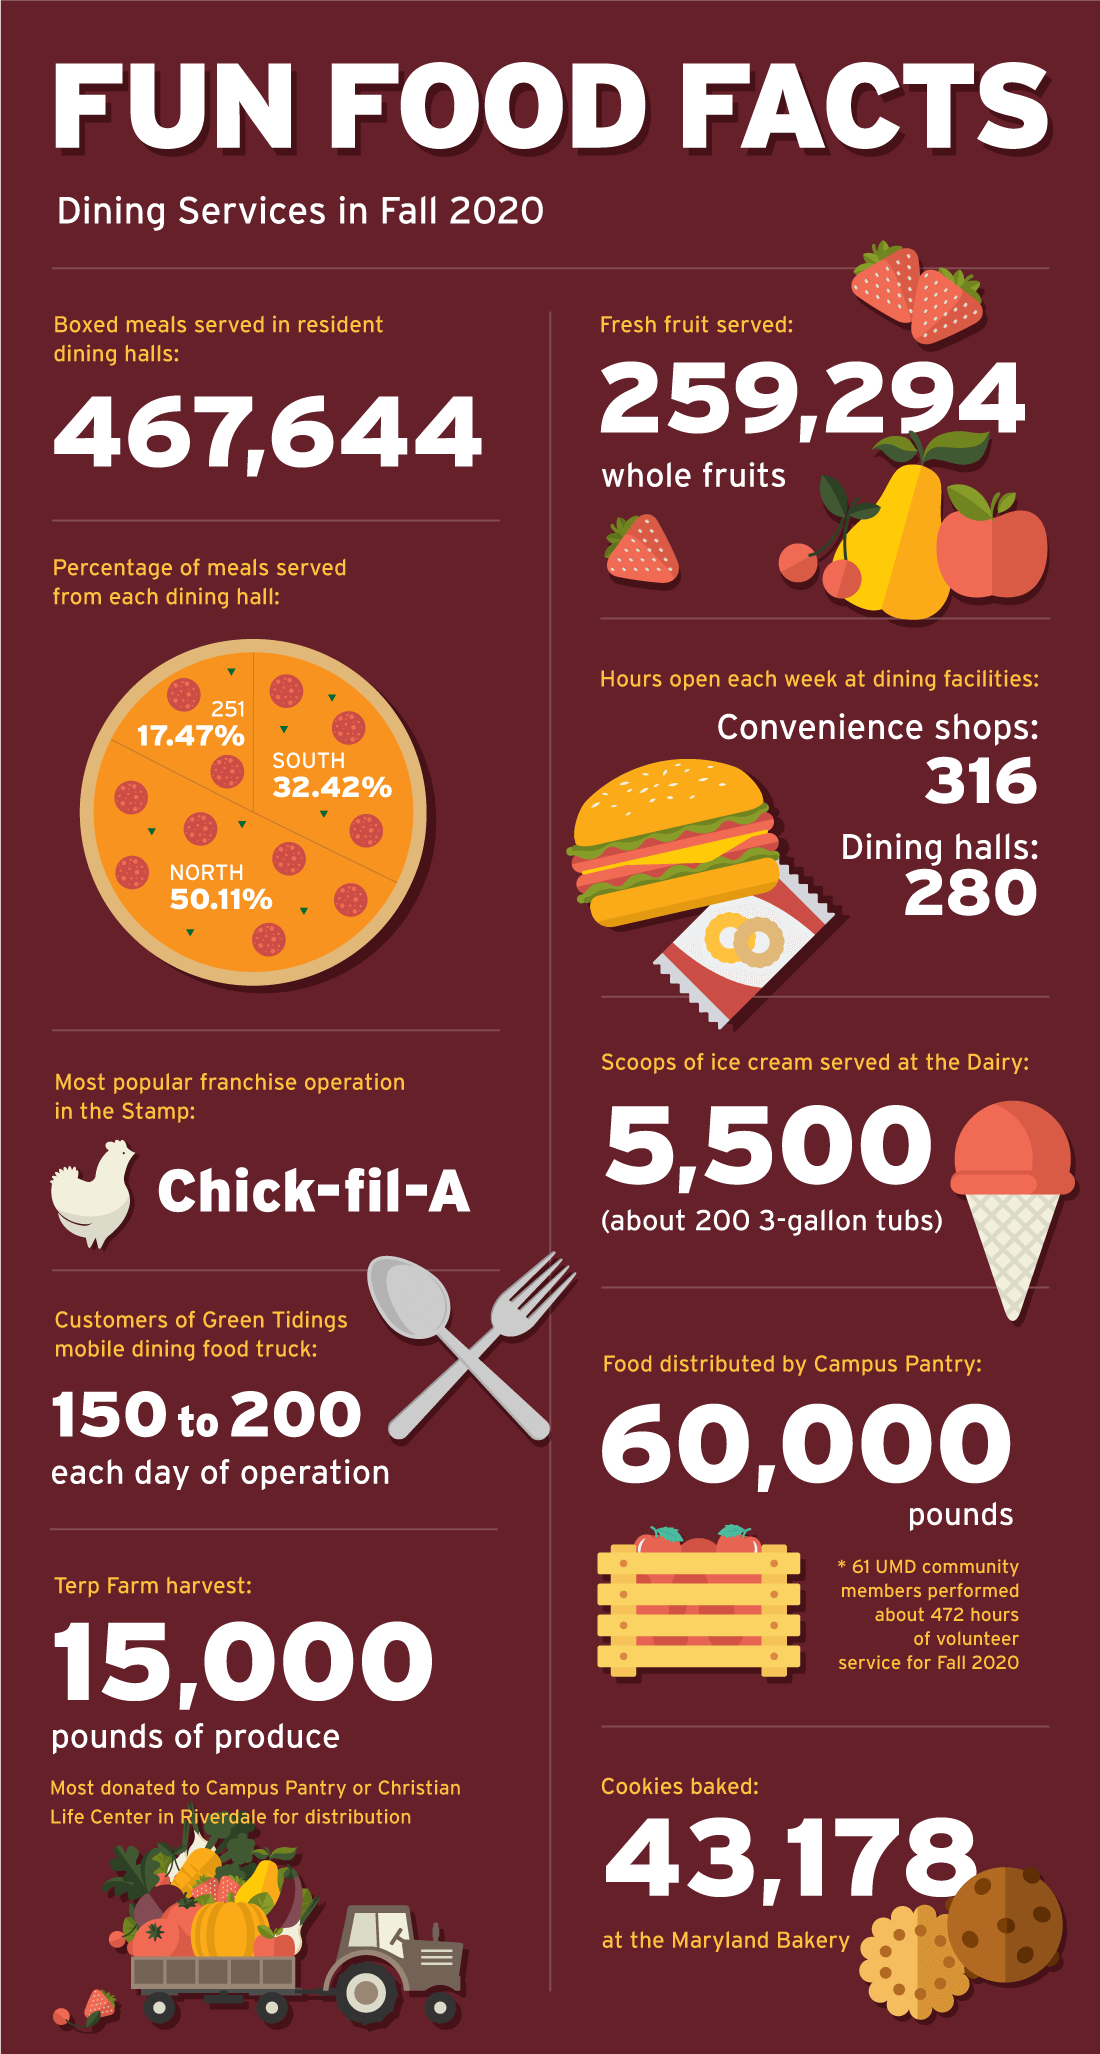 Fun Food Facts: Dining Services in Fall 2020. Boxed meals served in resident dining halls: 467,644. Fresh fruit served: 259,294 whole fruits. Percentage of meals served from each dining hall: 251: 17.47%. North: 50.11%. South: 32.42%. Hours open each week at dining facilities: Convenience shops: 316. Dining halls: 280. Most popular franchise option in the Stamp: Chick-fil-A. Scoops of ice cream served at the Dairy: 5,500 (about 200 3-gallon tubs). Customers of Green Tidings mobile dining food truck: 150-200 each day of operation. Food distributed by Campus Pantry: 60,000 pounds. 61 UMD community members performed about 472 hours of volunteer service for Fall 2020. Terp Farm harvest: 15,000 pounds of produce. Most donated to Campus Pantry or Christian Life Center in Riverdale for distribution. Cookies baked: 43,178 at the Maryland Bakery.